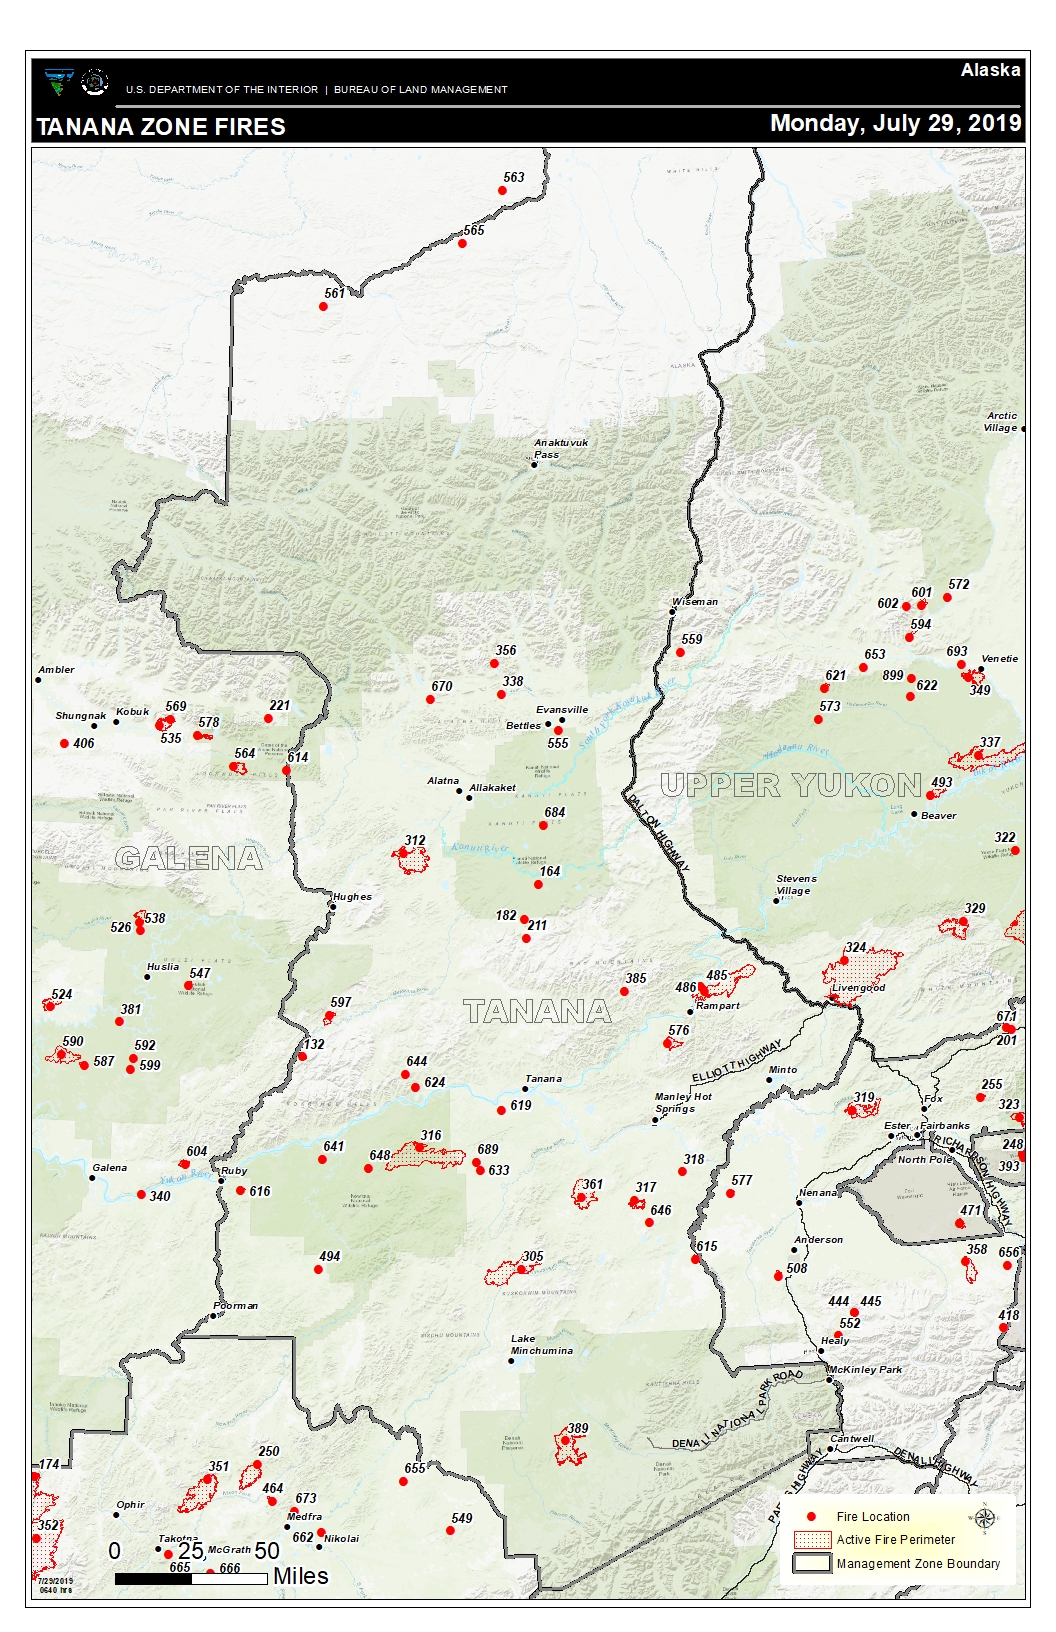 Map shows current wildfire locations and perimeters in the Tanana Zone in central Alasksa